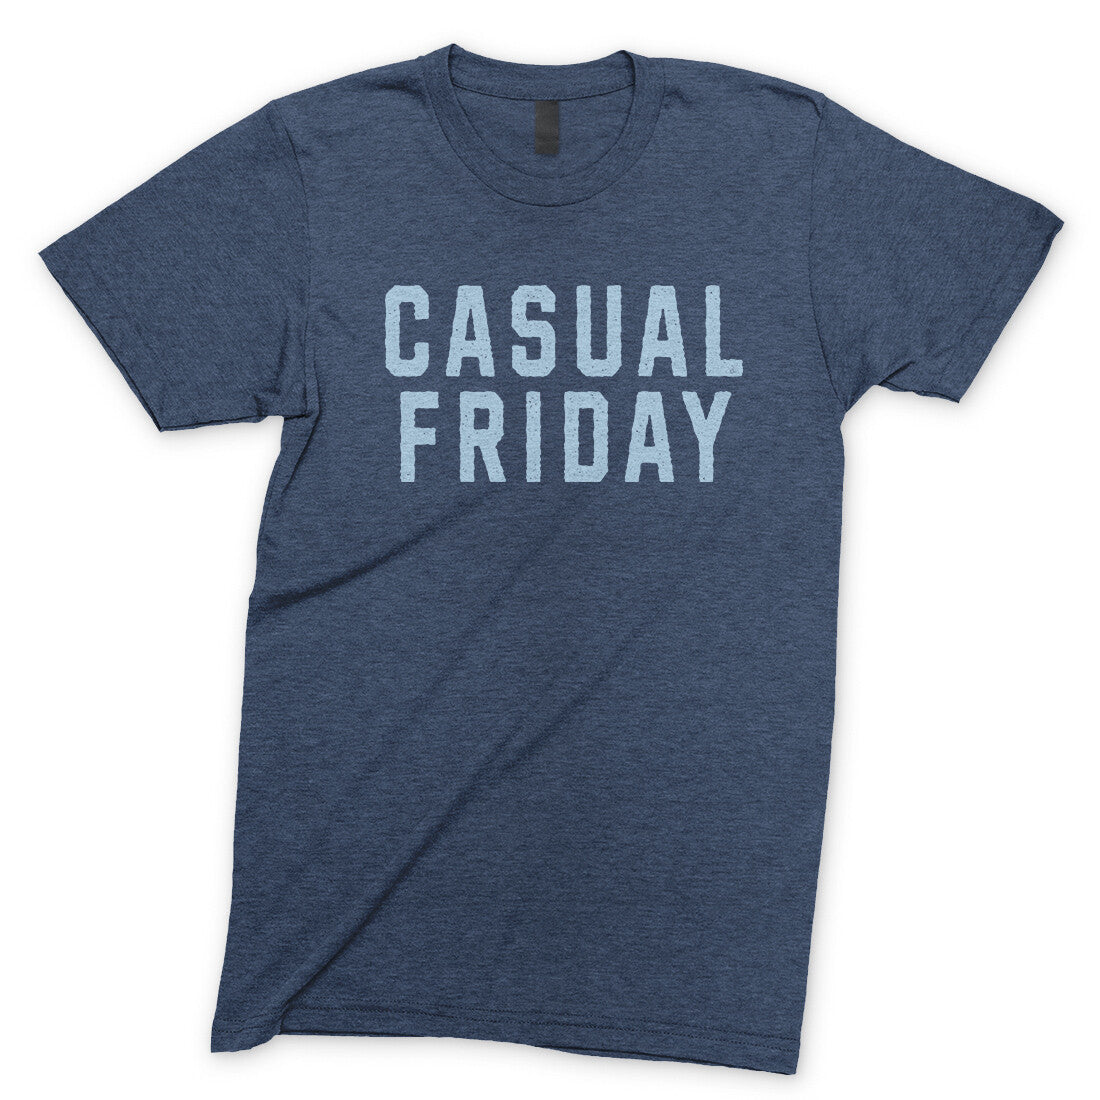 Casual Friday in Navy Heather Color